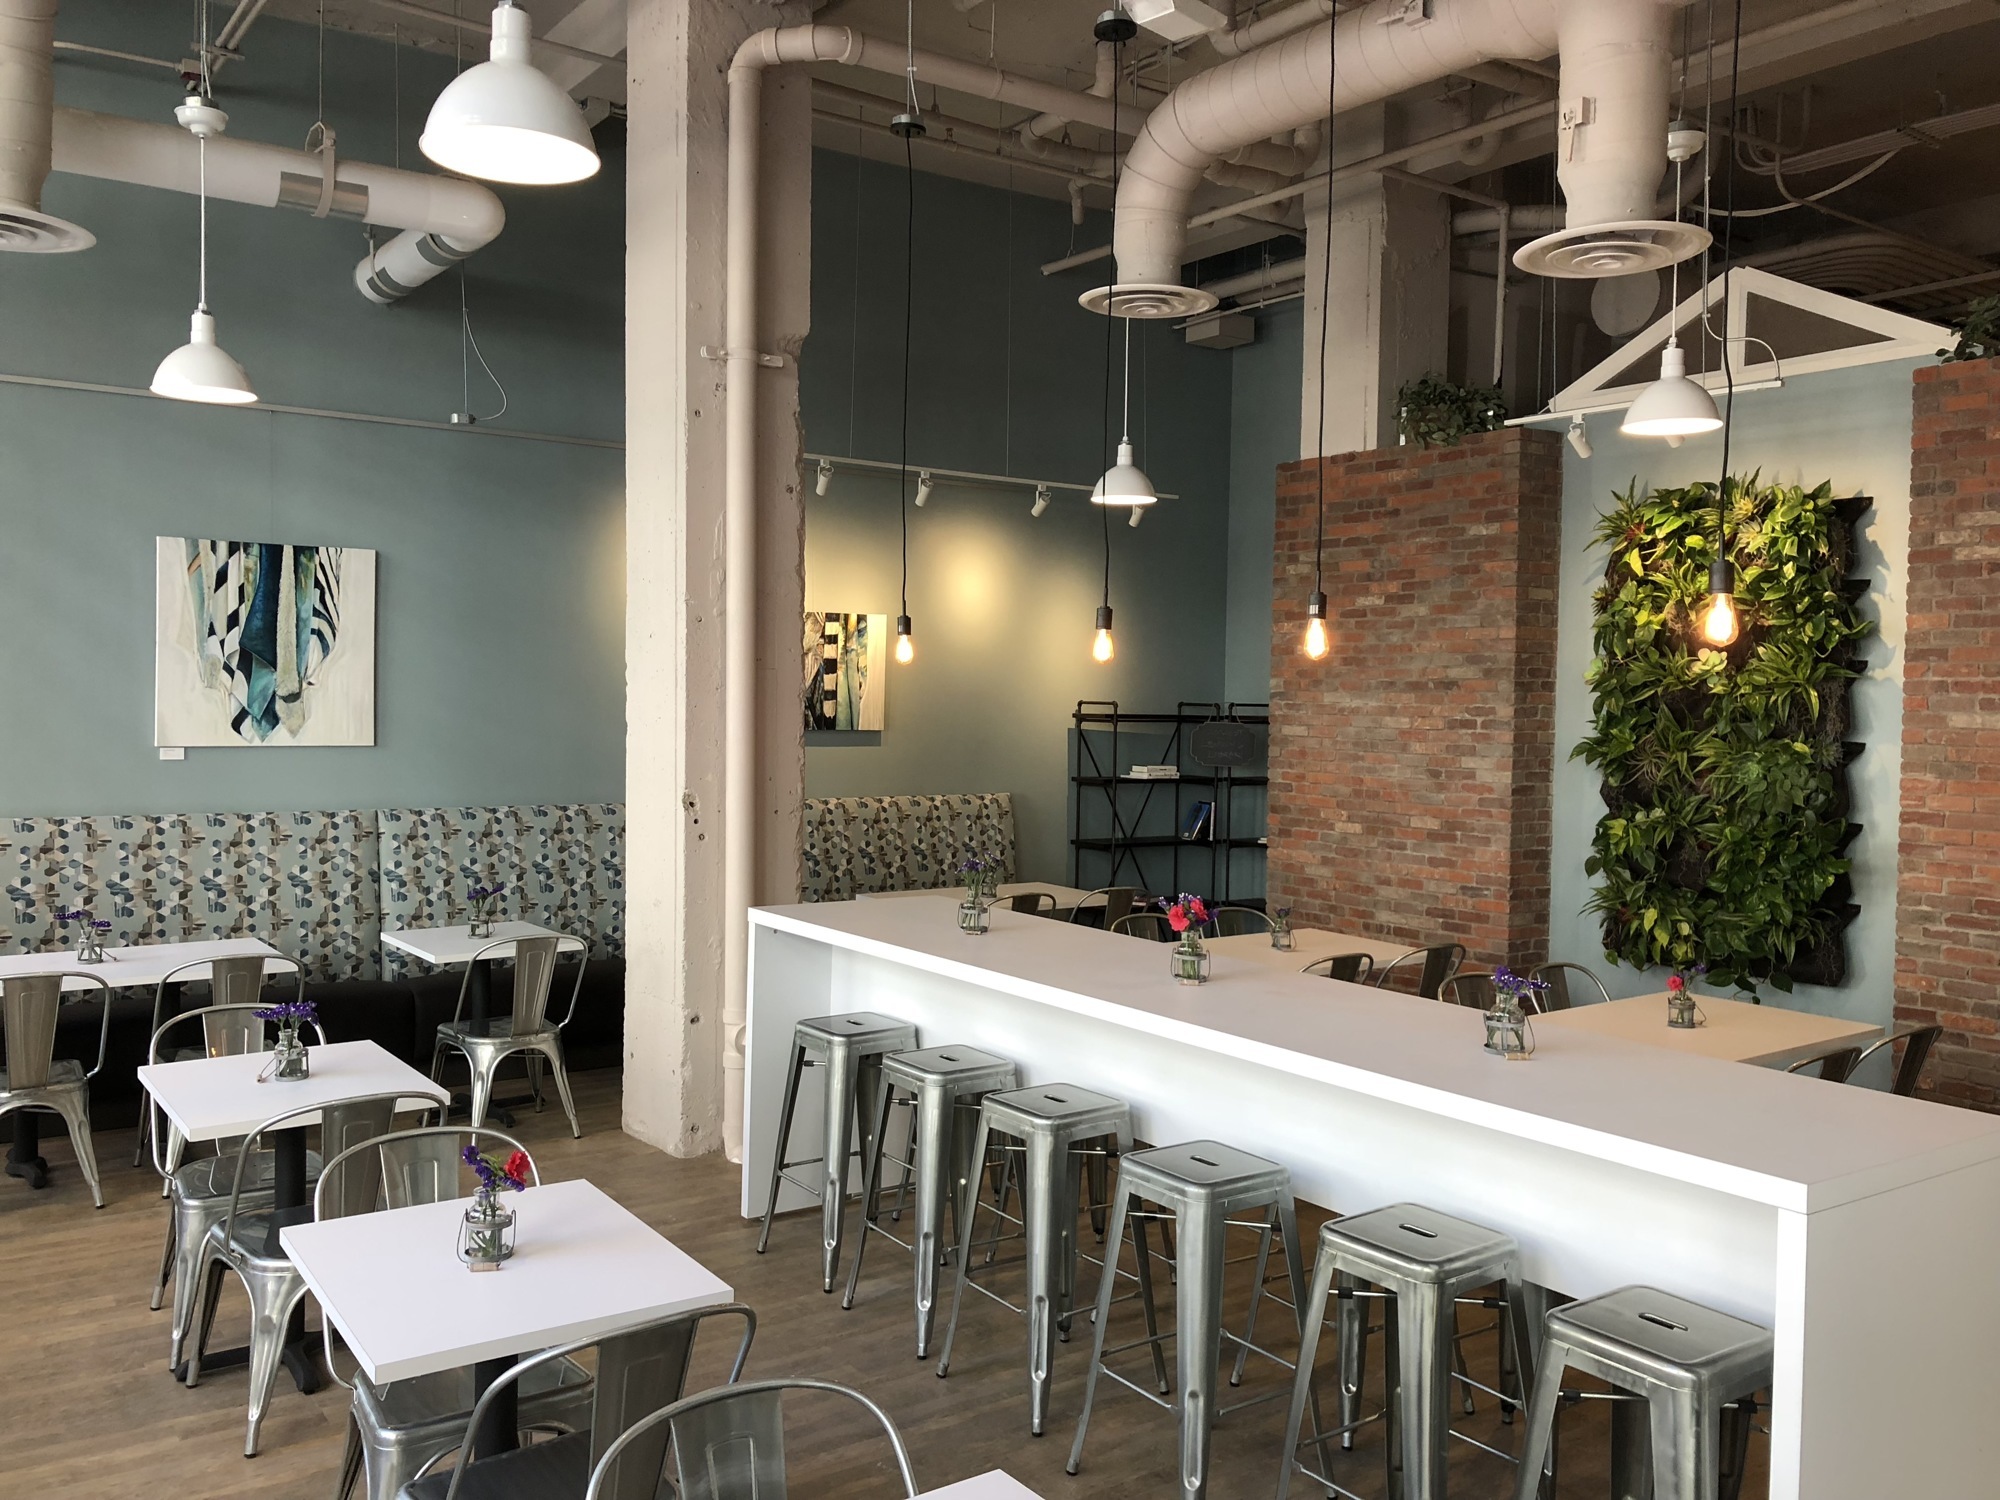 FSCJ opened the 20West Cafe in April 2018 to provide training for its culinary students.